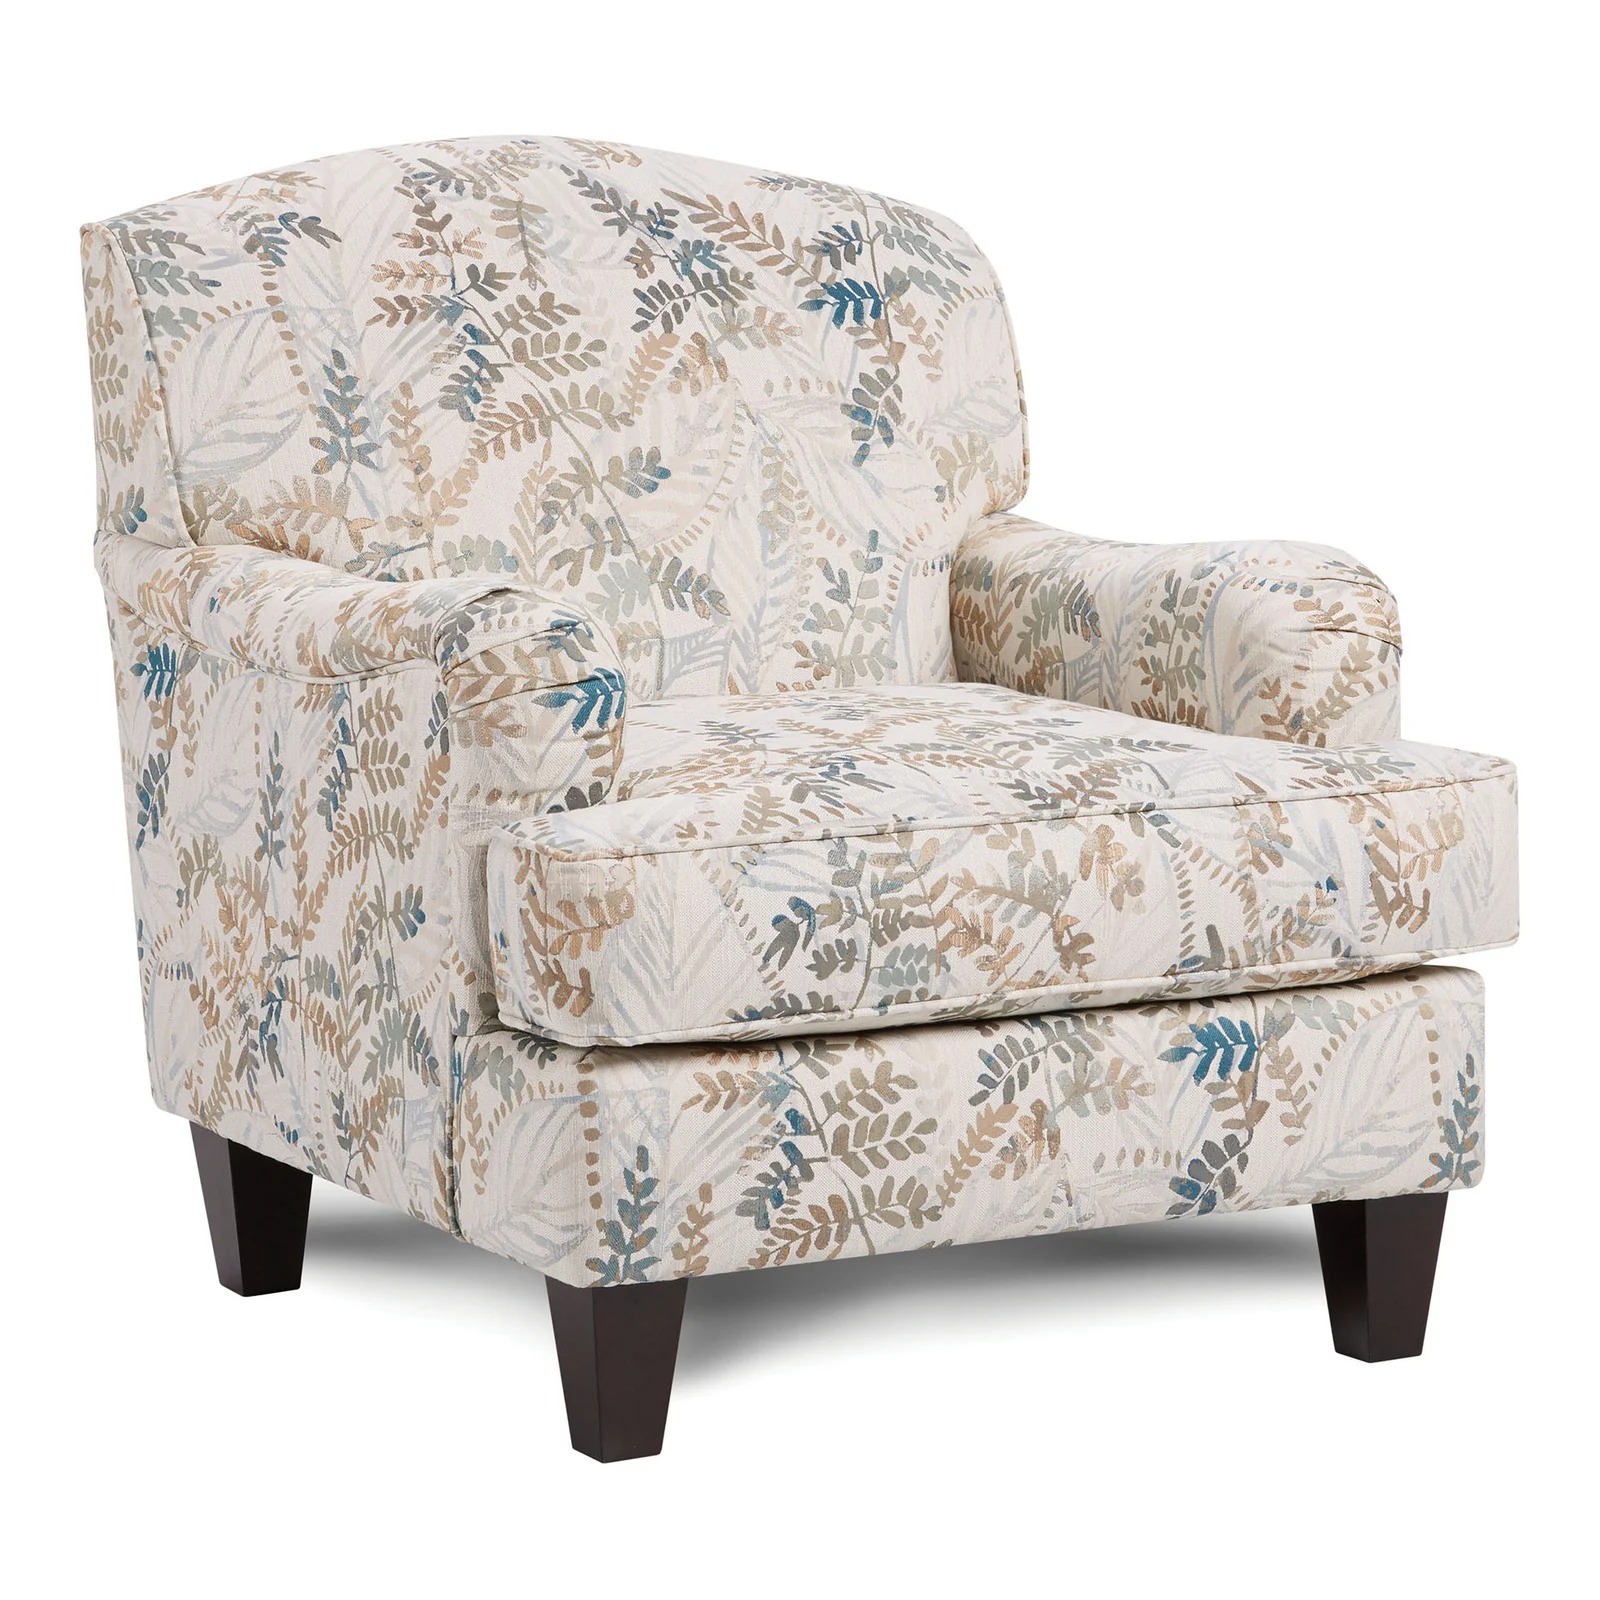 Elegant and Simple Floral Accent Chair 